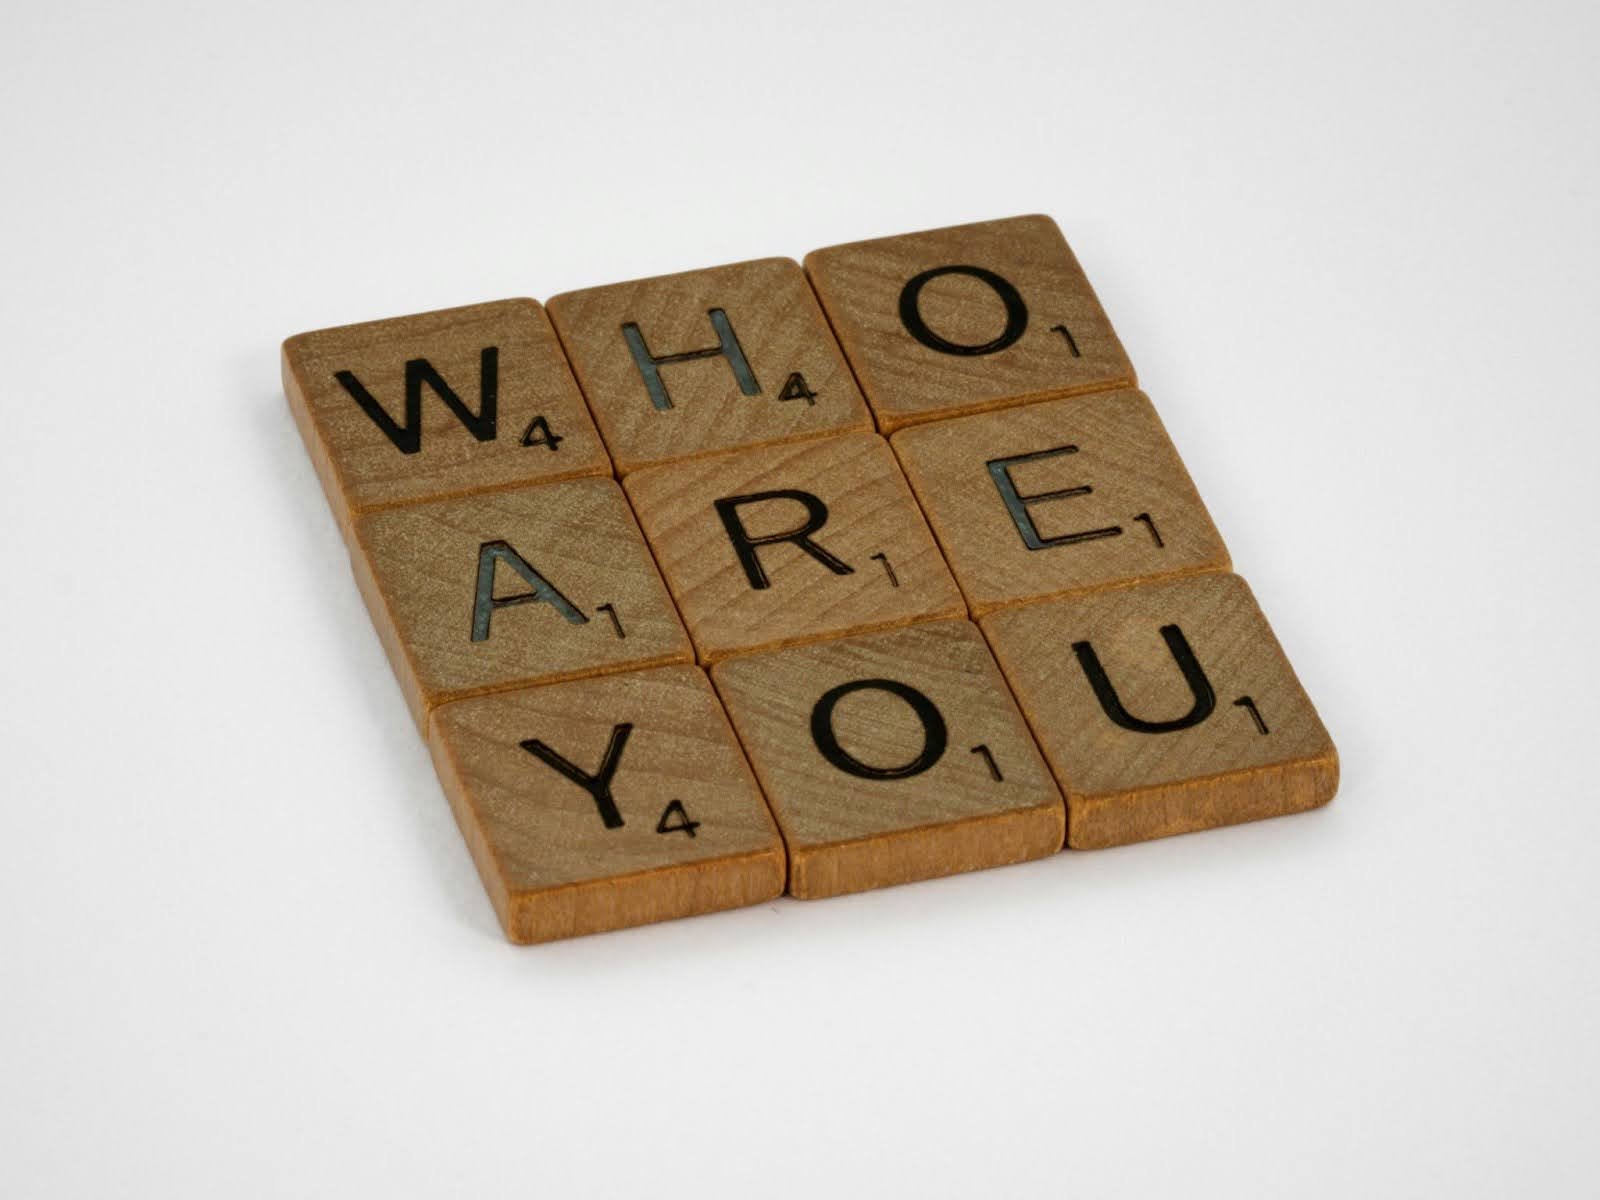 Scrabble tiles spelling - Who are you